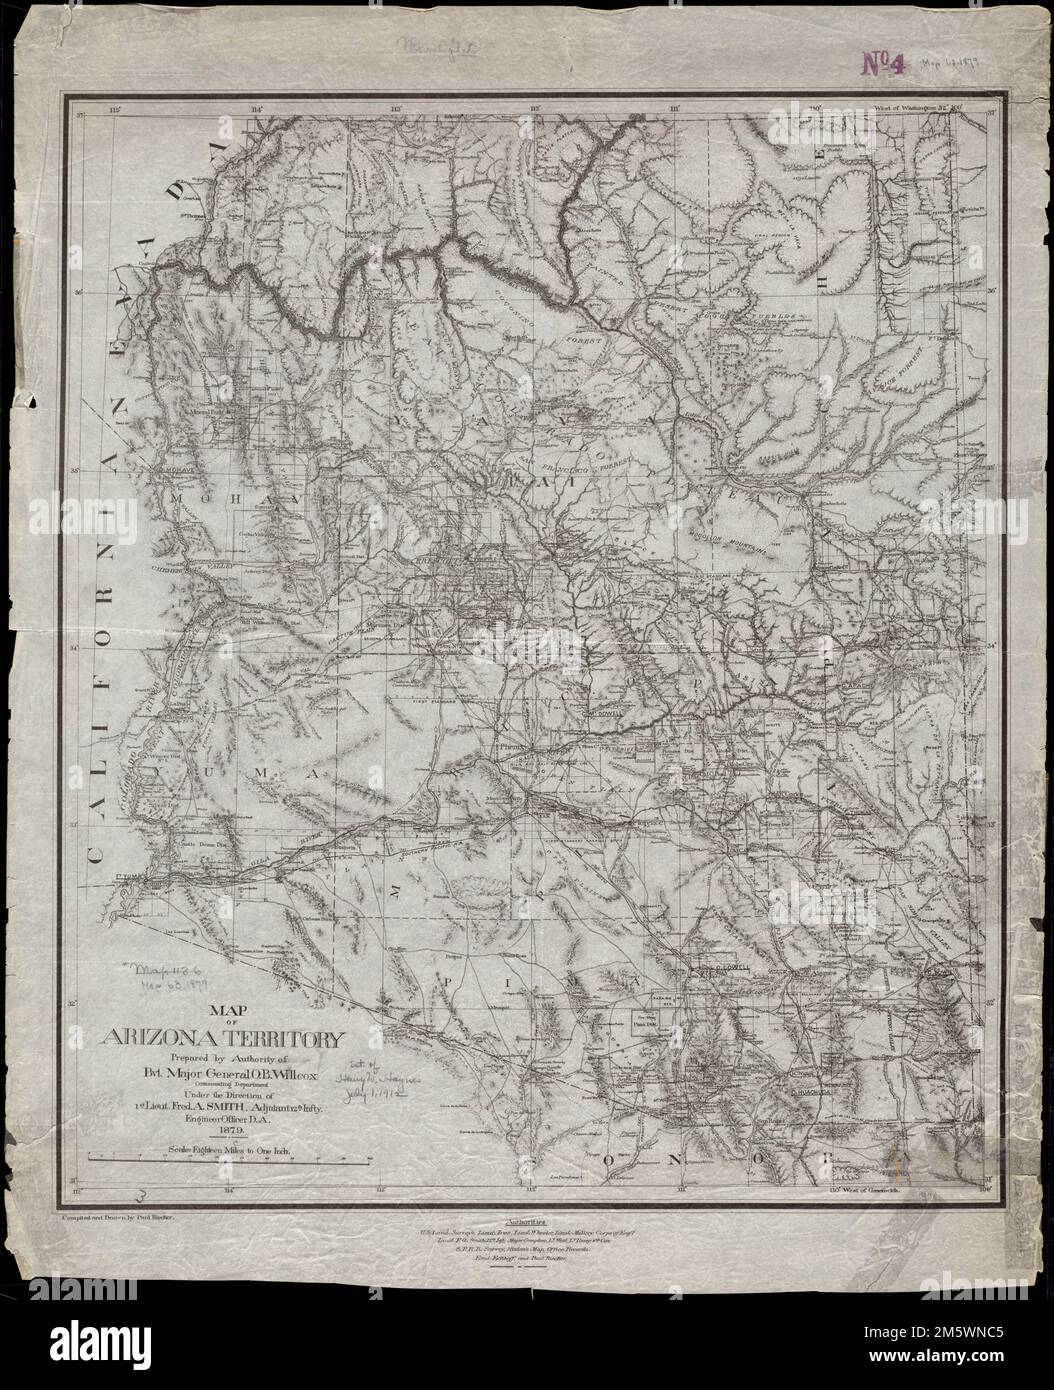 Map of Arizona Territory. Relief shown by hachures. Prime meridians ...